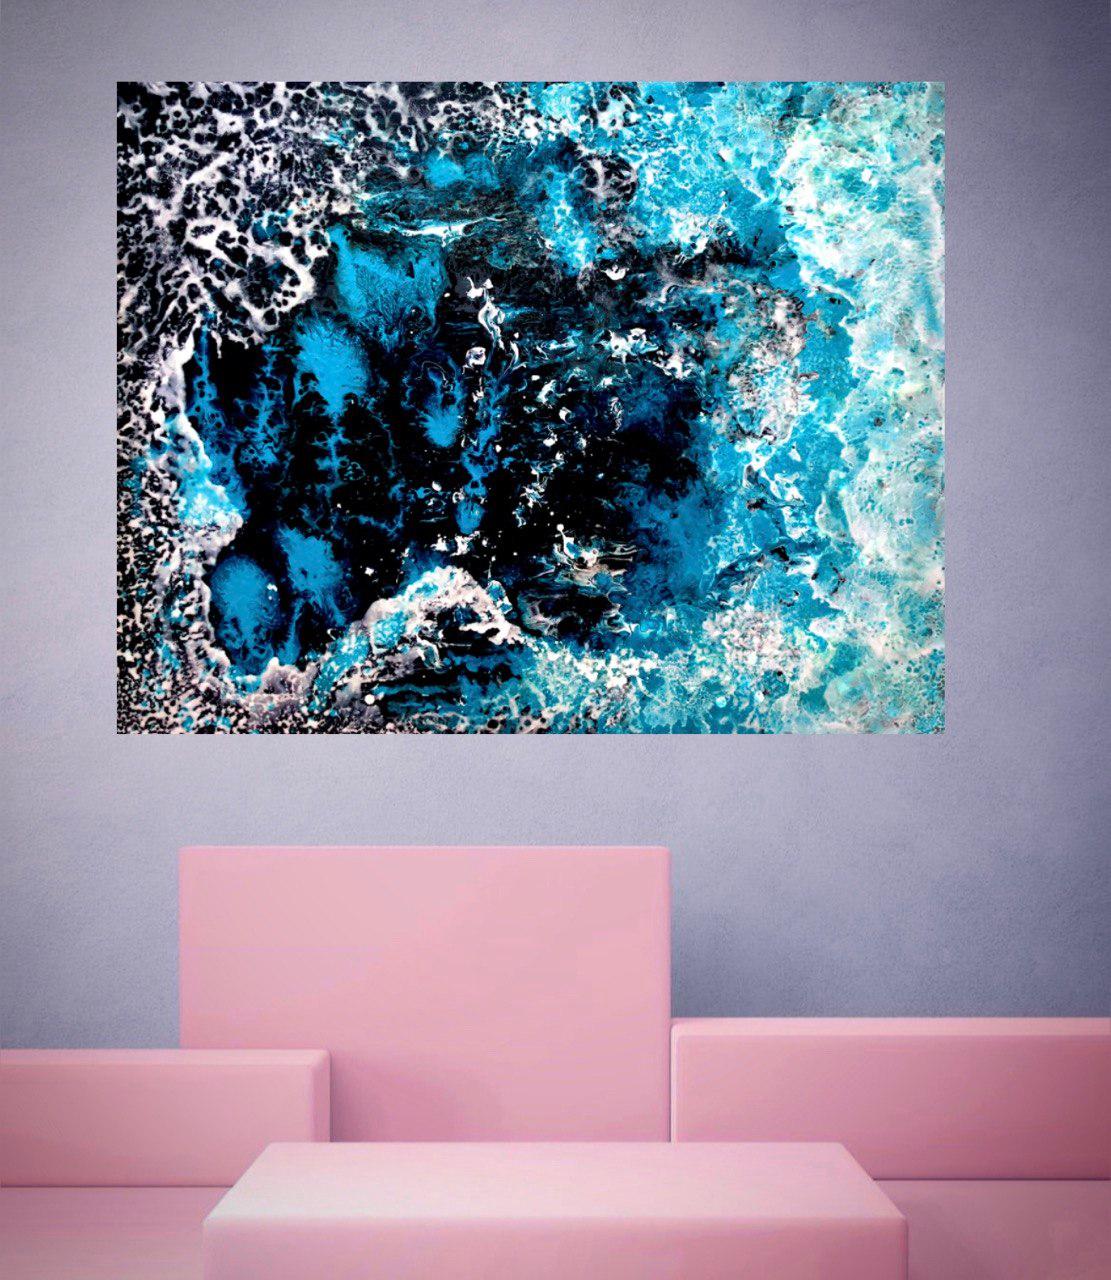 Looking into the Depth. Abstract Lage painting. / Water/ Sea / Blue, white color For Sale 12